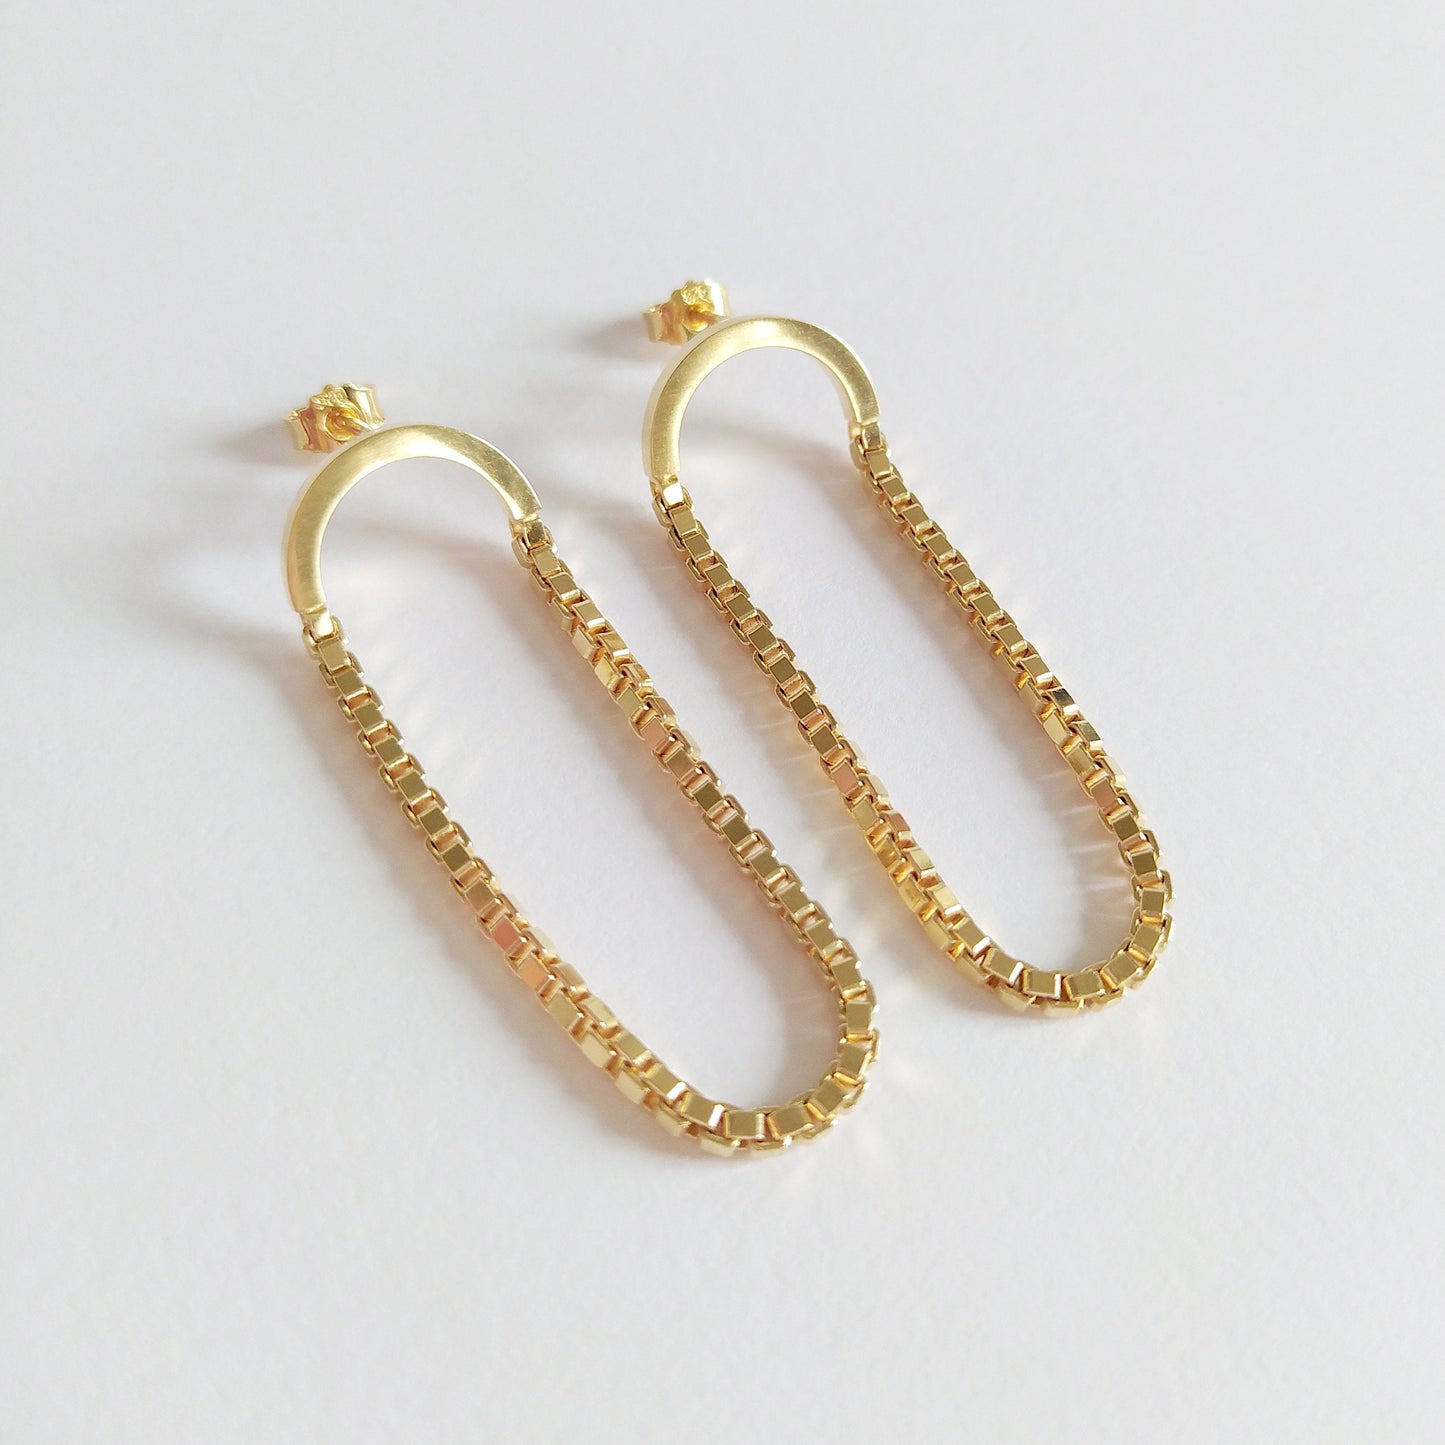 Edda | golden earrings with hanging chain